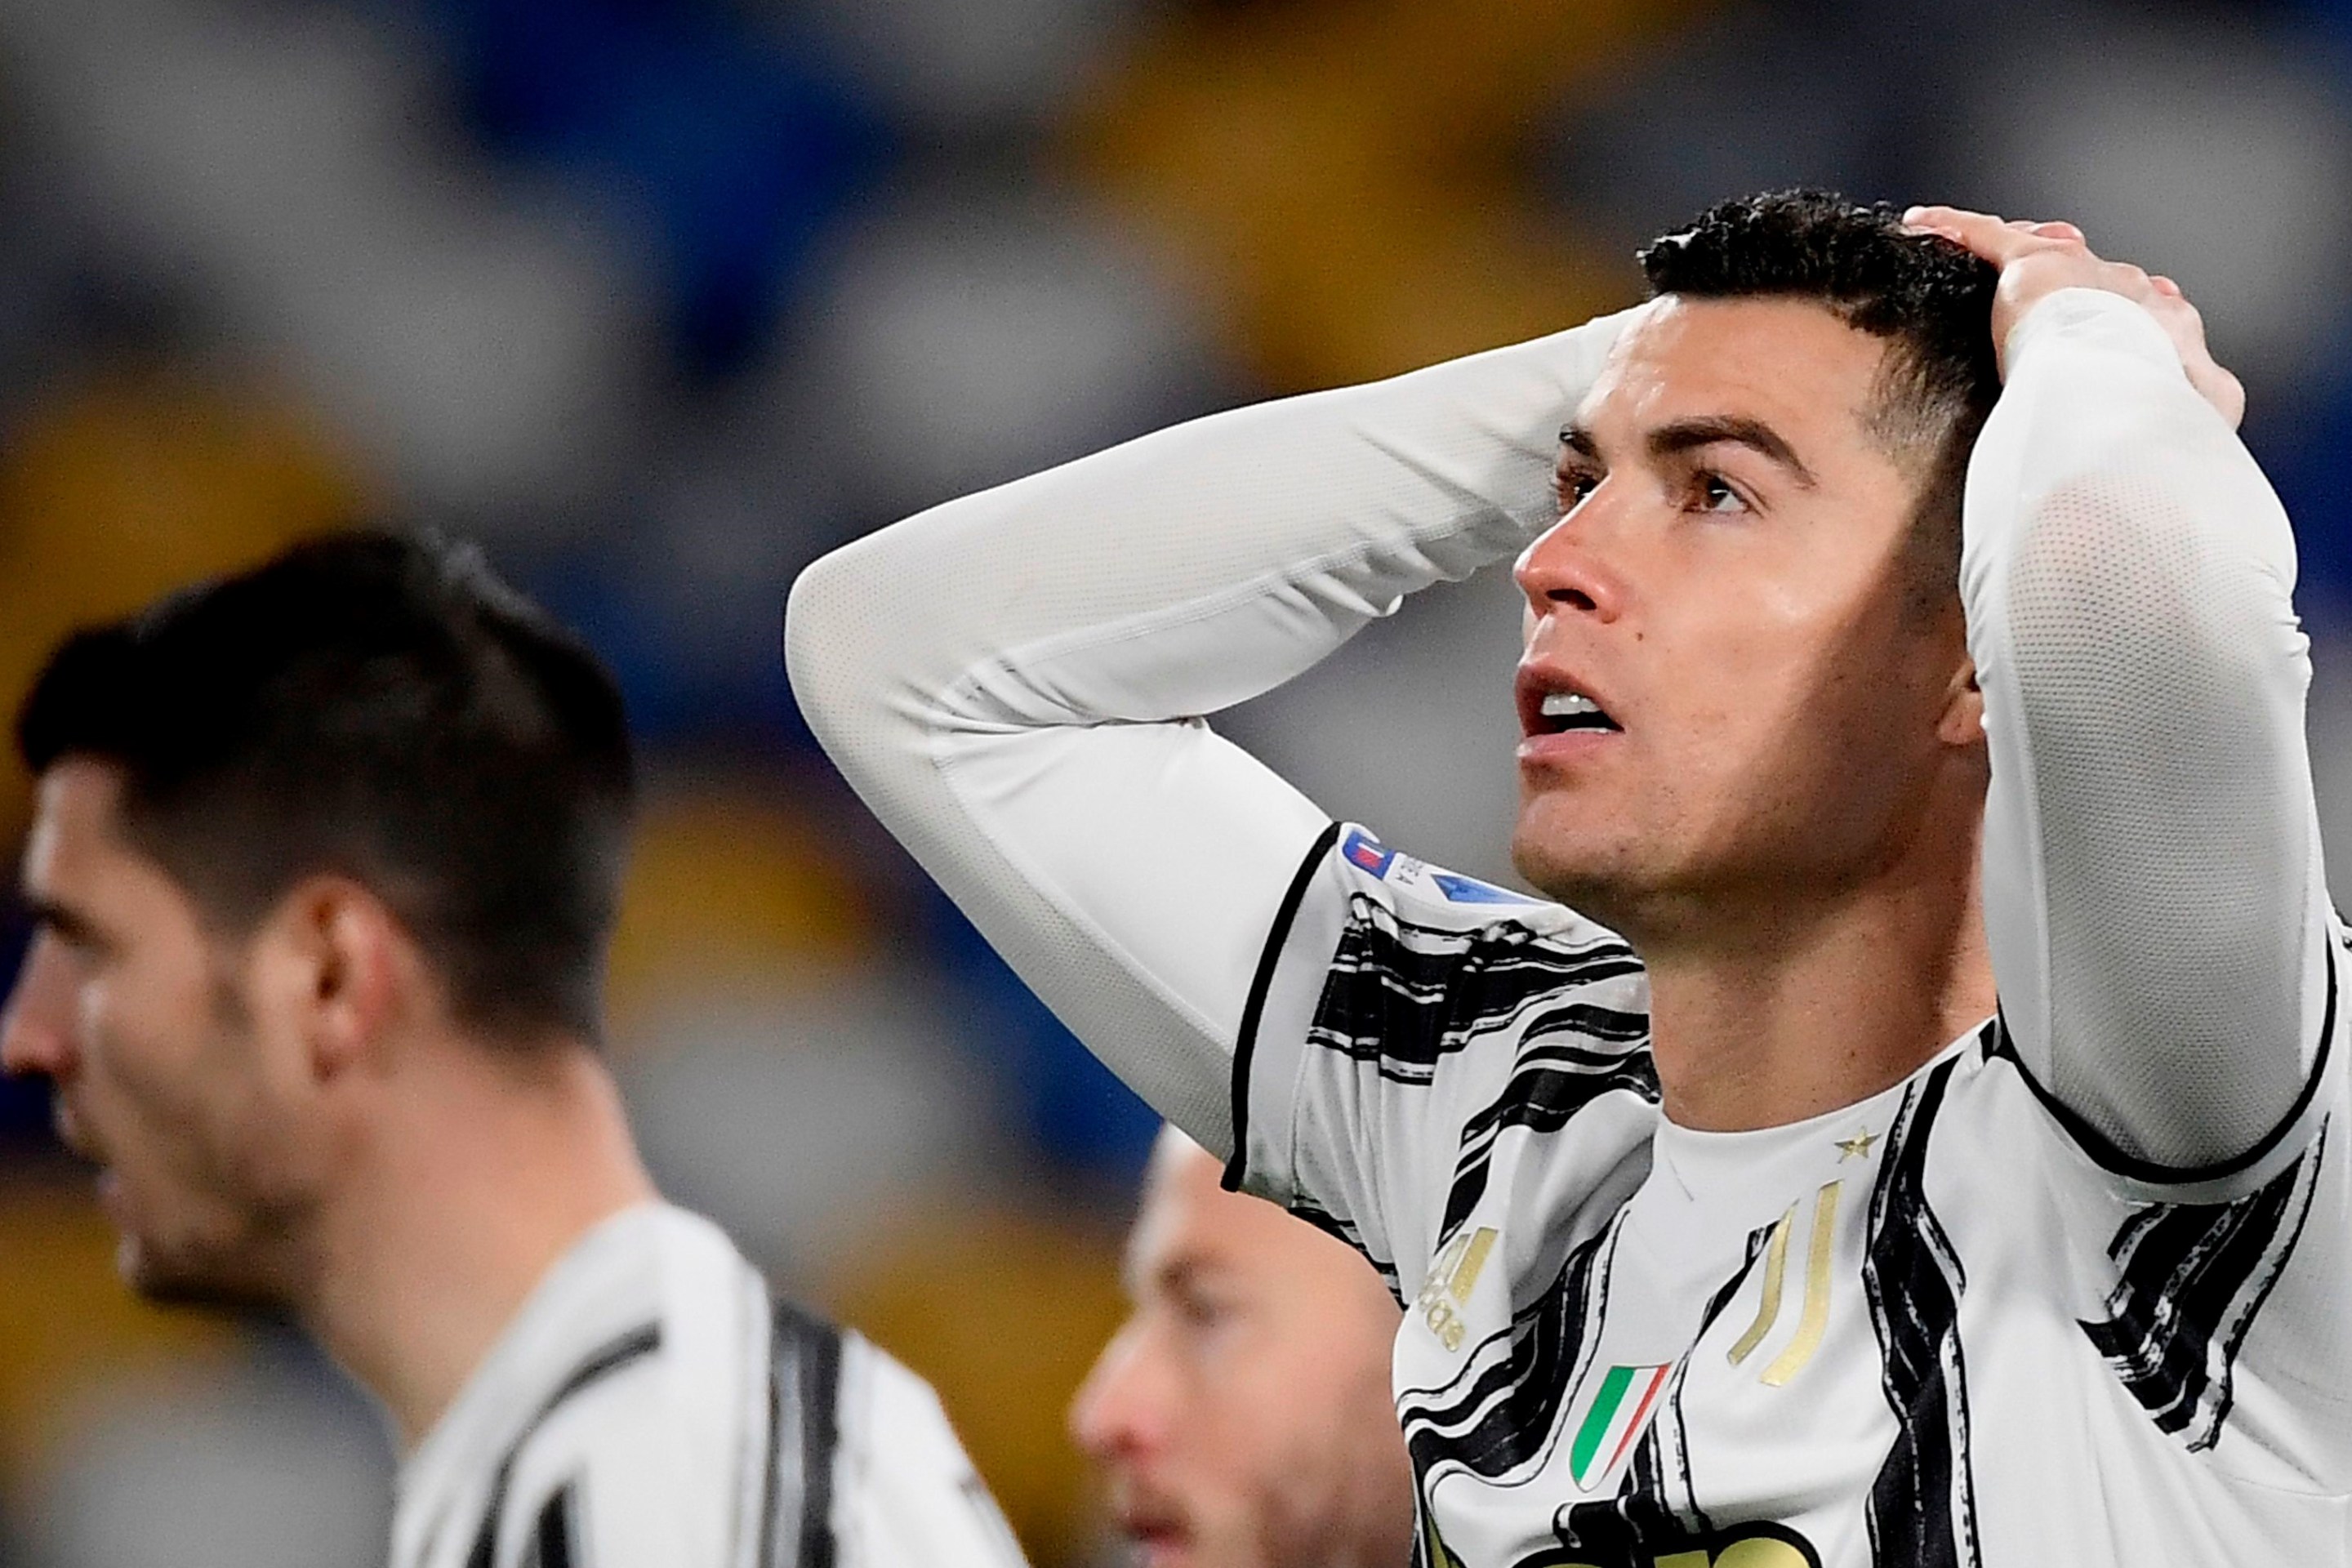 Juventus' Portuguese forward Cristiano Ronaldo reacts after missing a goal opportunity during the Italian Serie A football match Napoli vs Juventus on February 13, 2021 at the Diego Maradona (San Paolo) stadium in Naples.